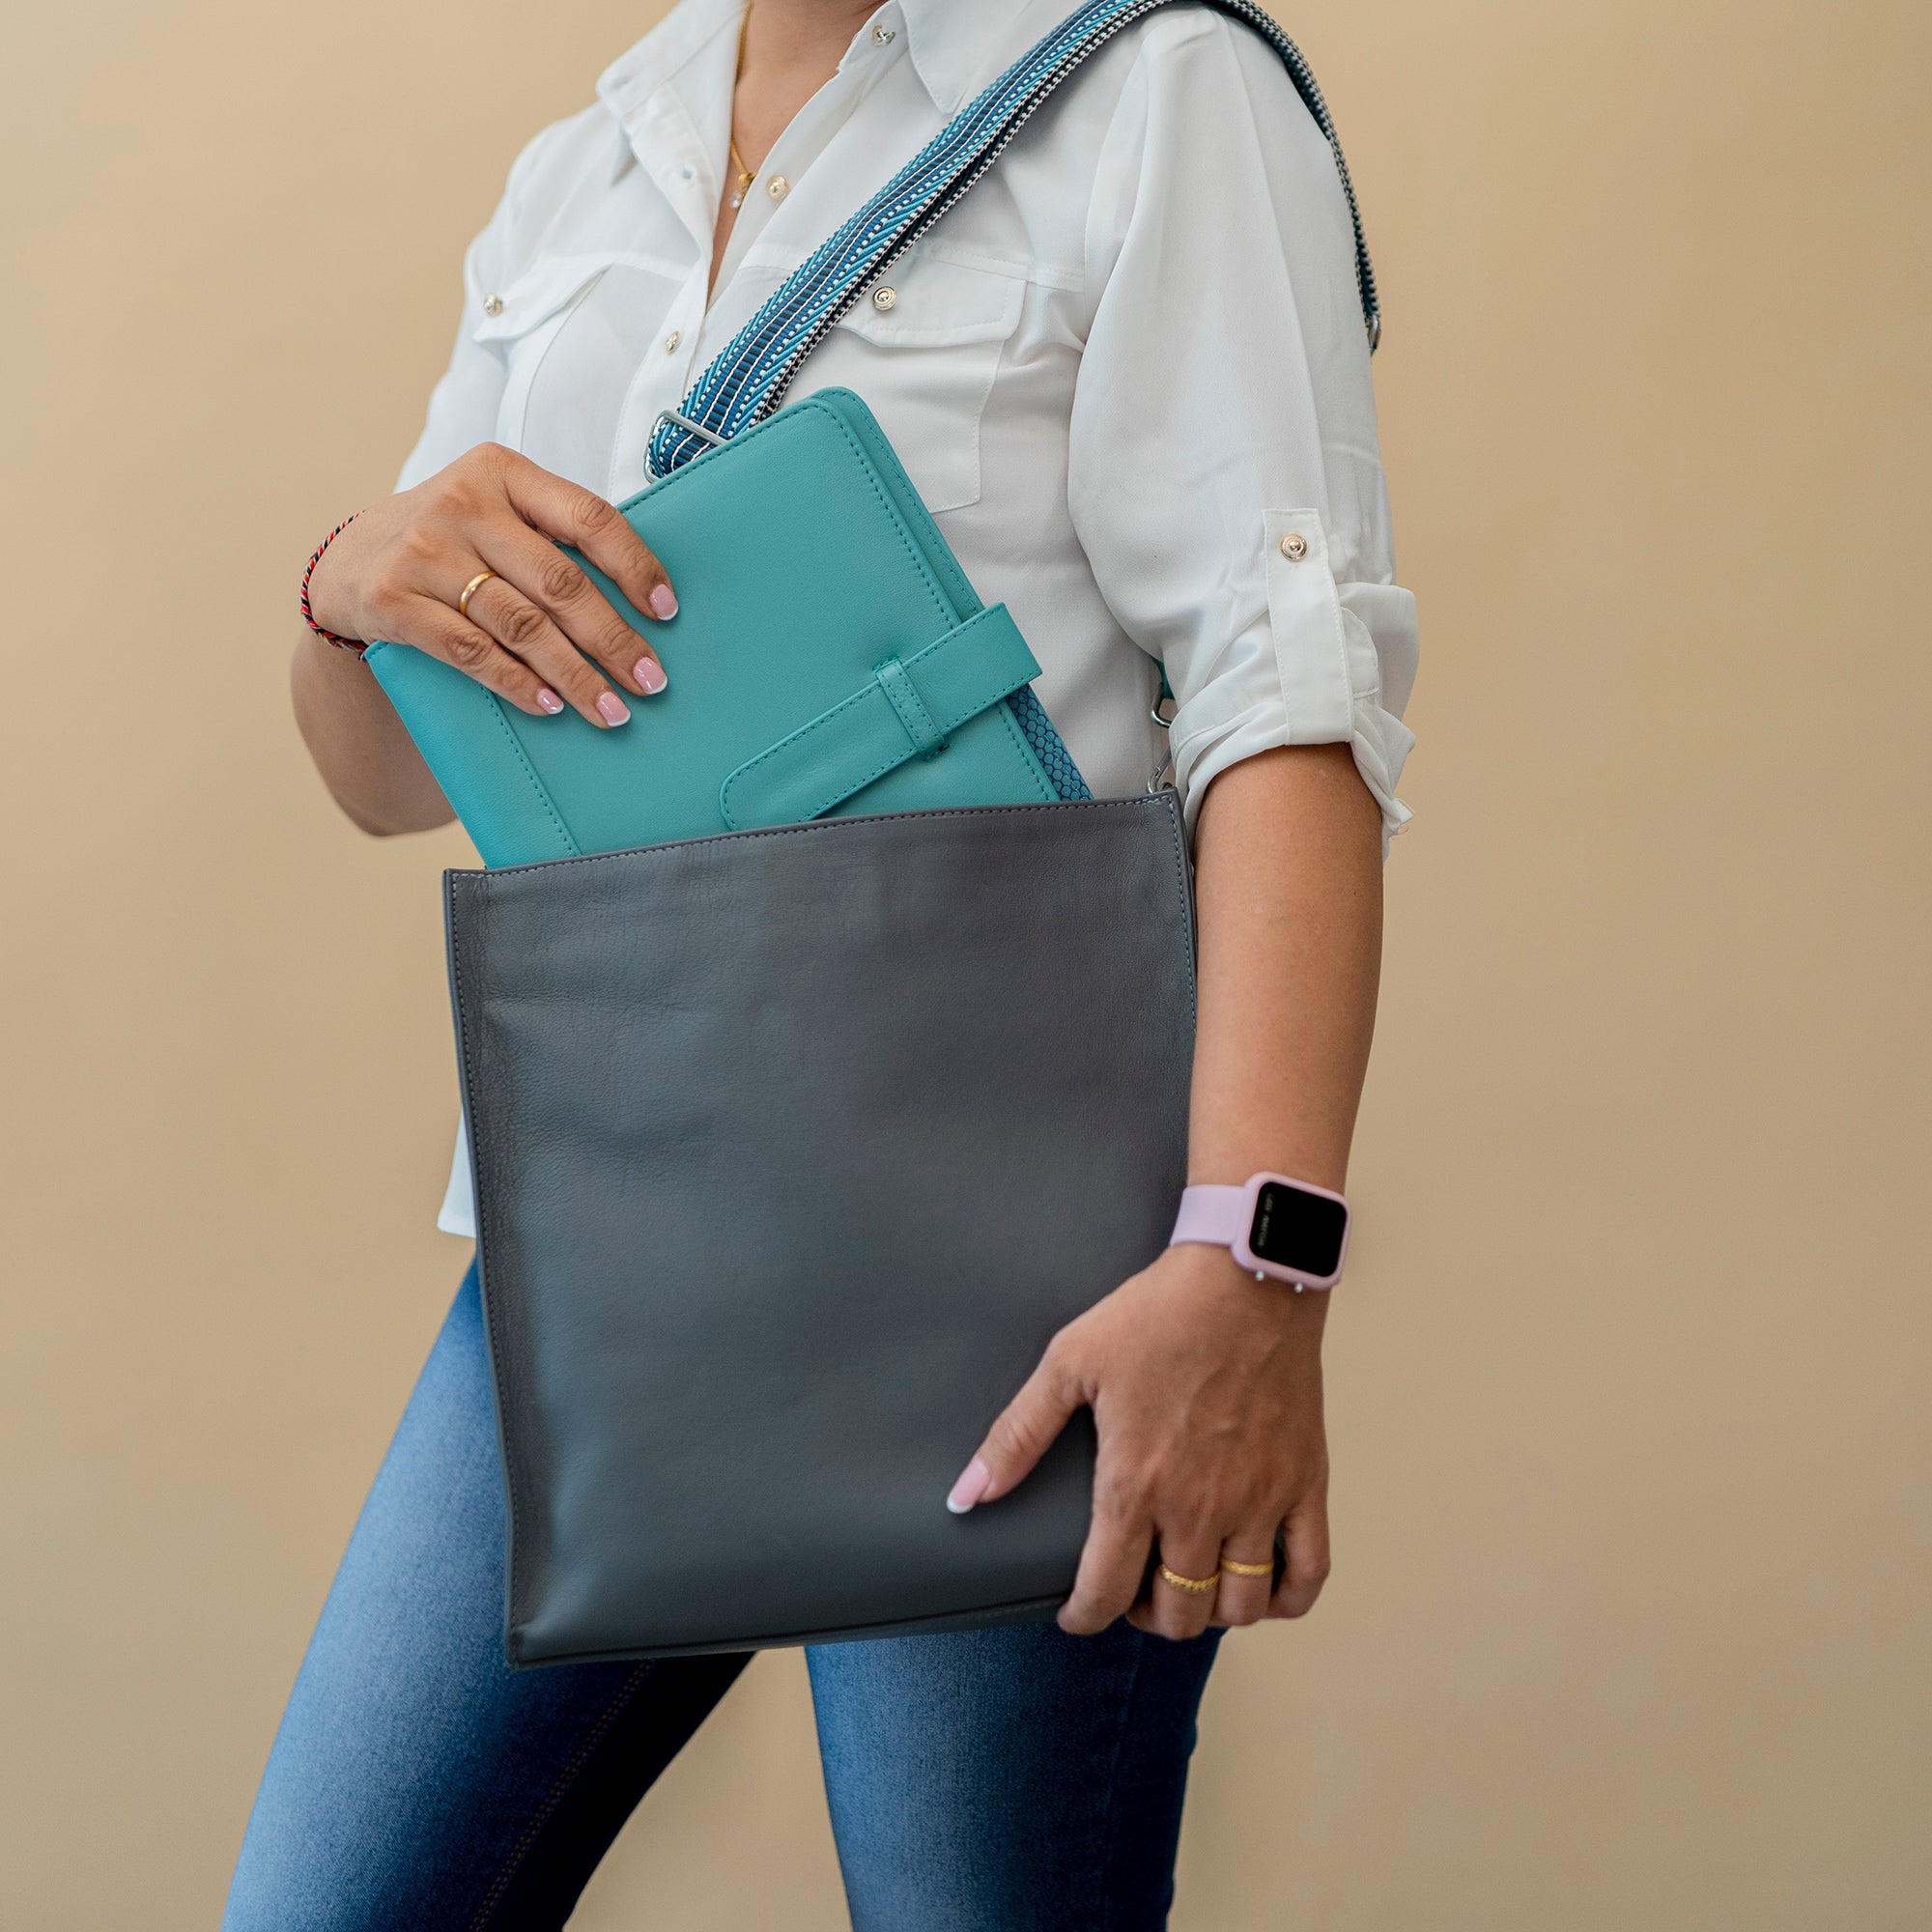 3 Ways to Wear a Messenger Bag - wikiHow